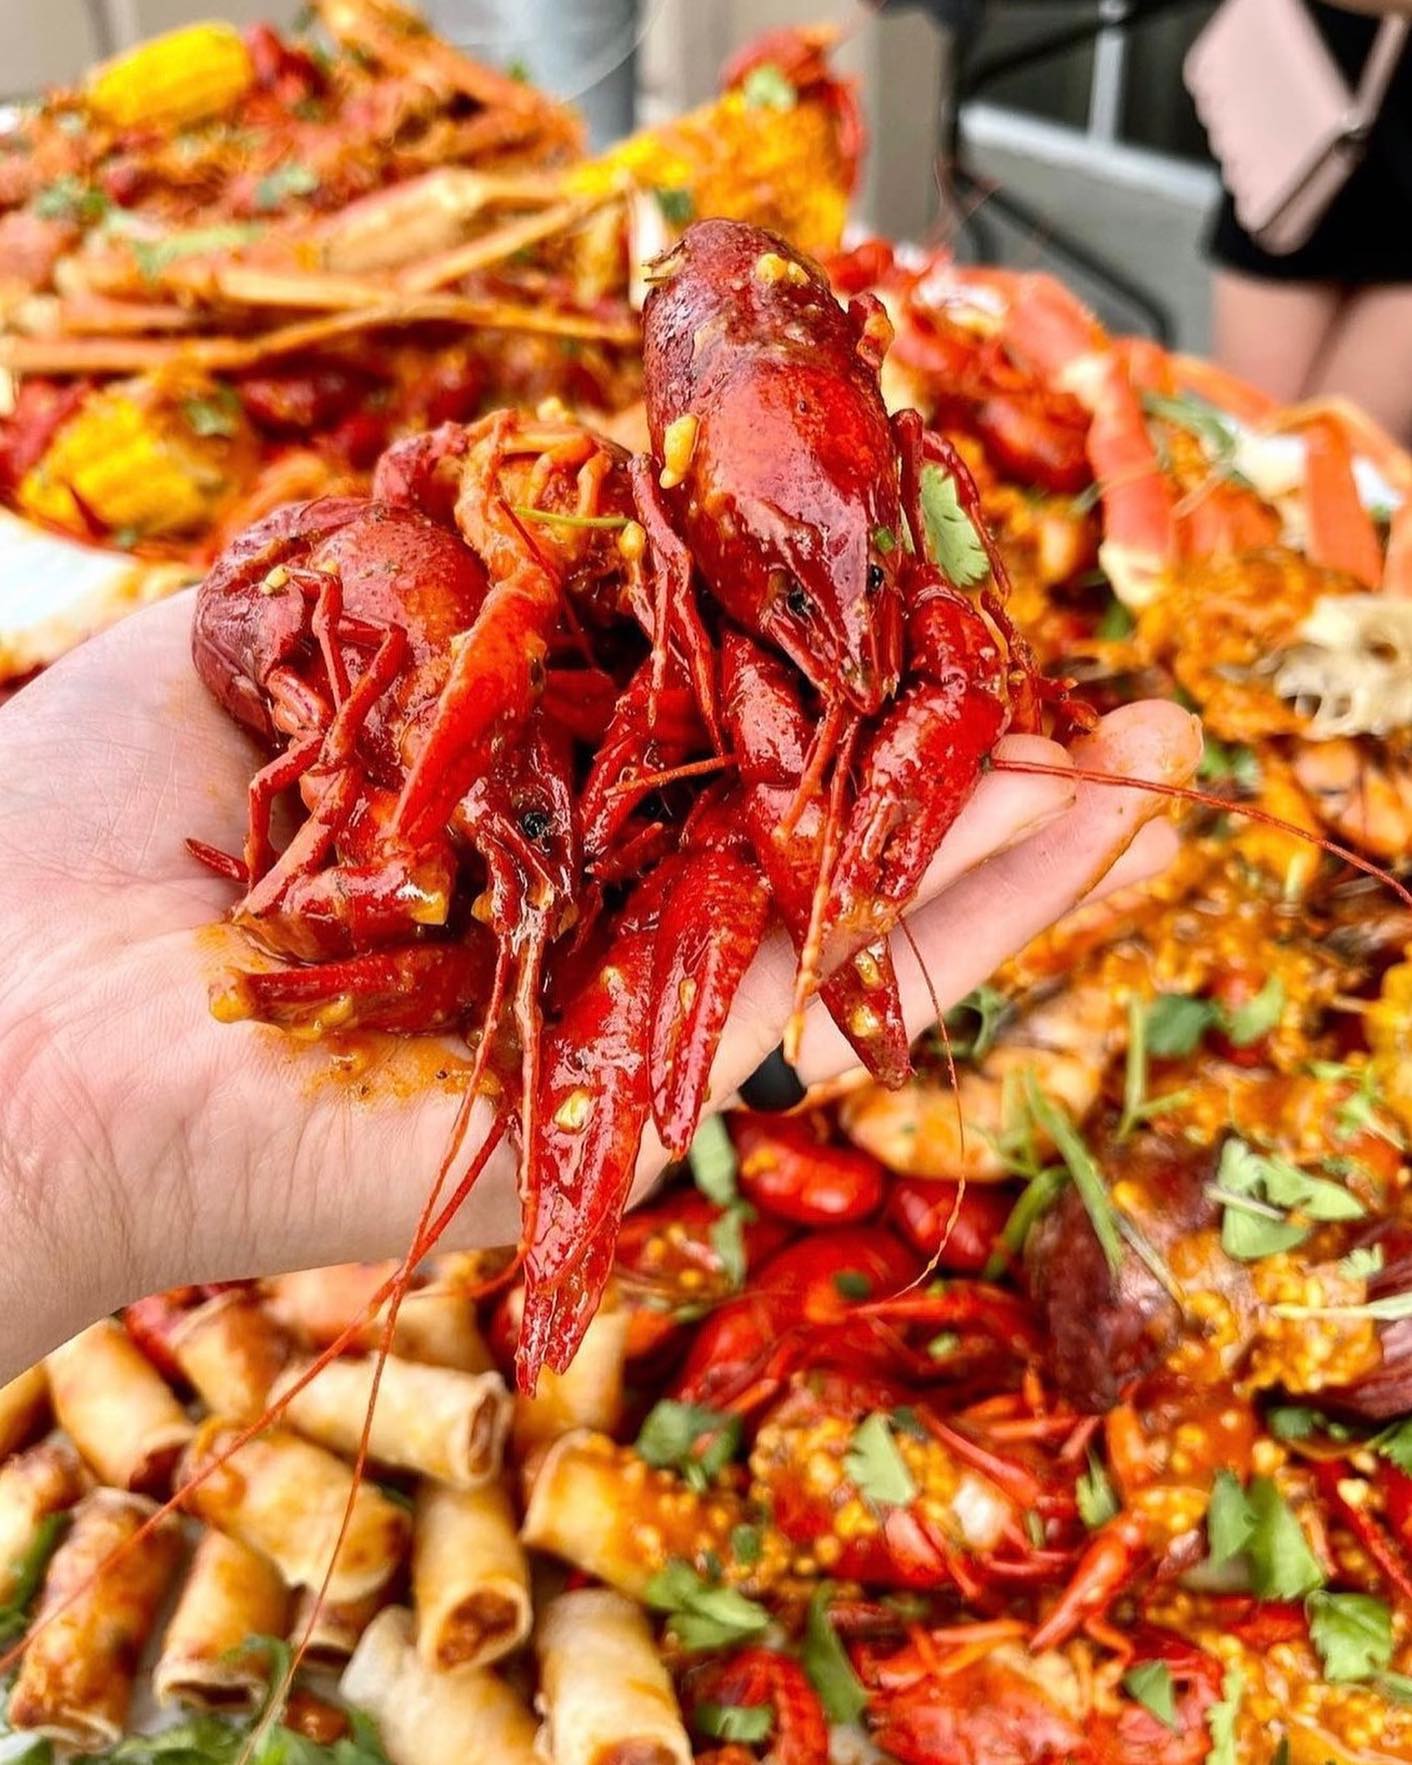 A hand holding a pile of boiled crawfish drenched in a spicy sauce.